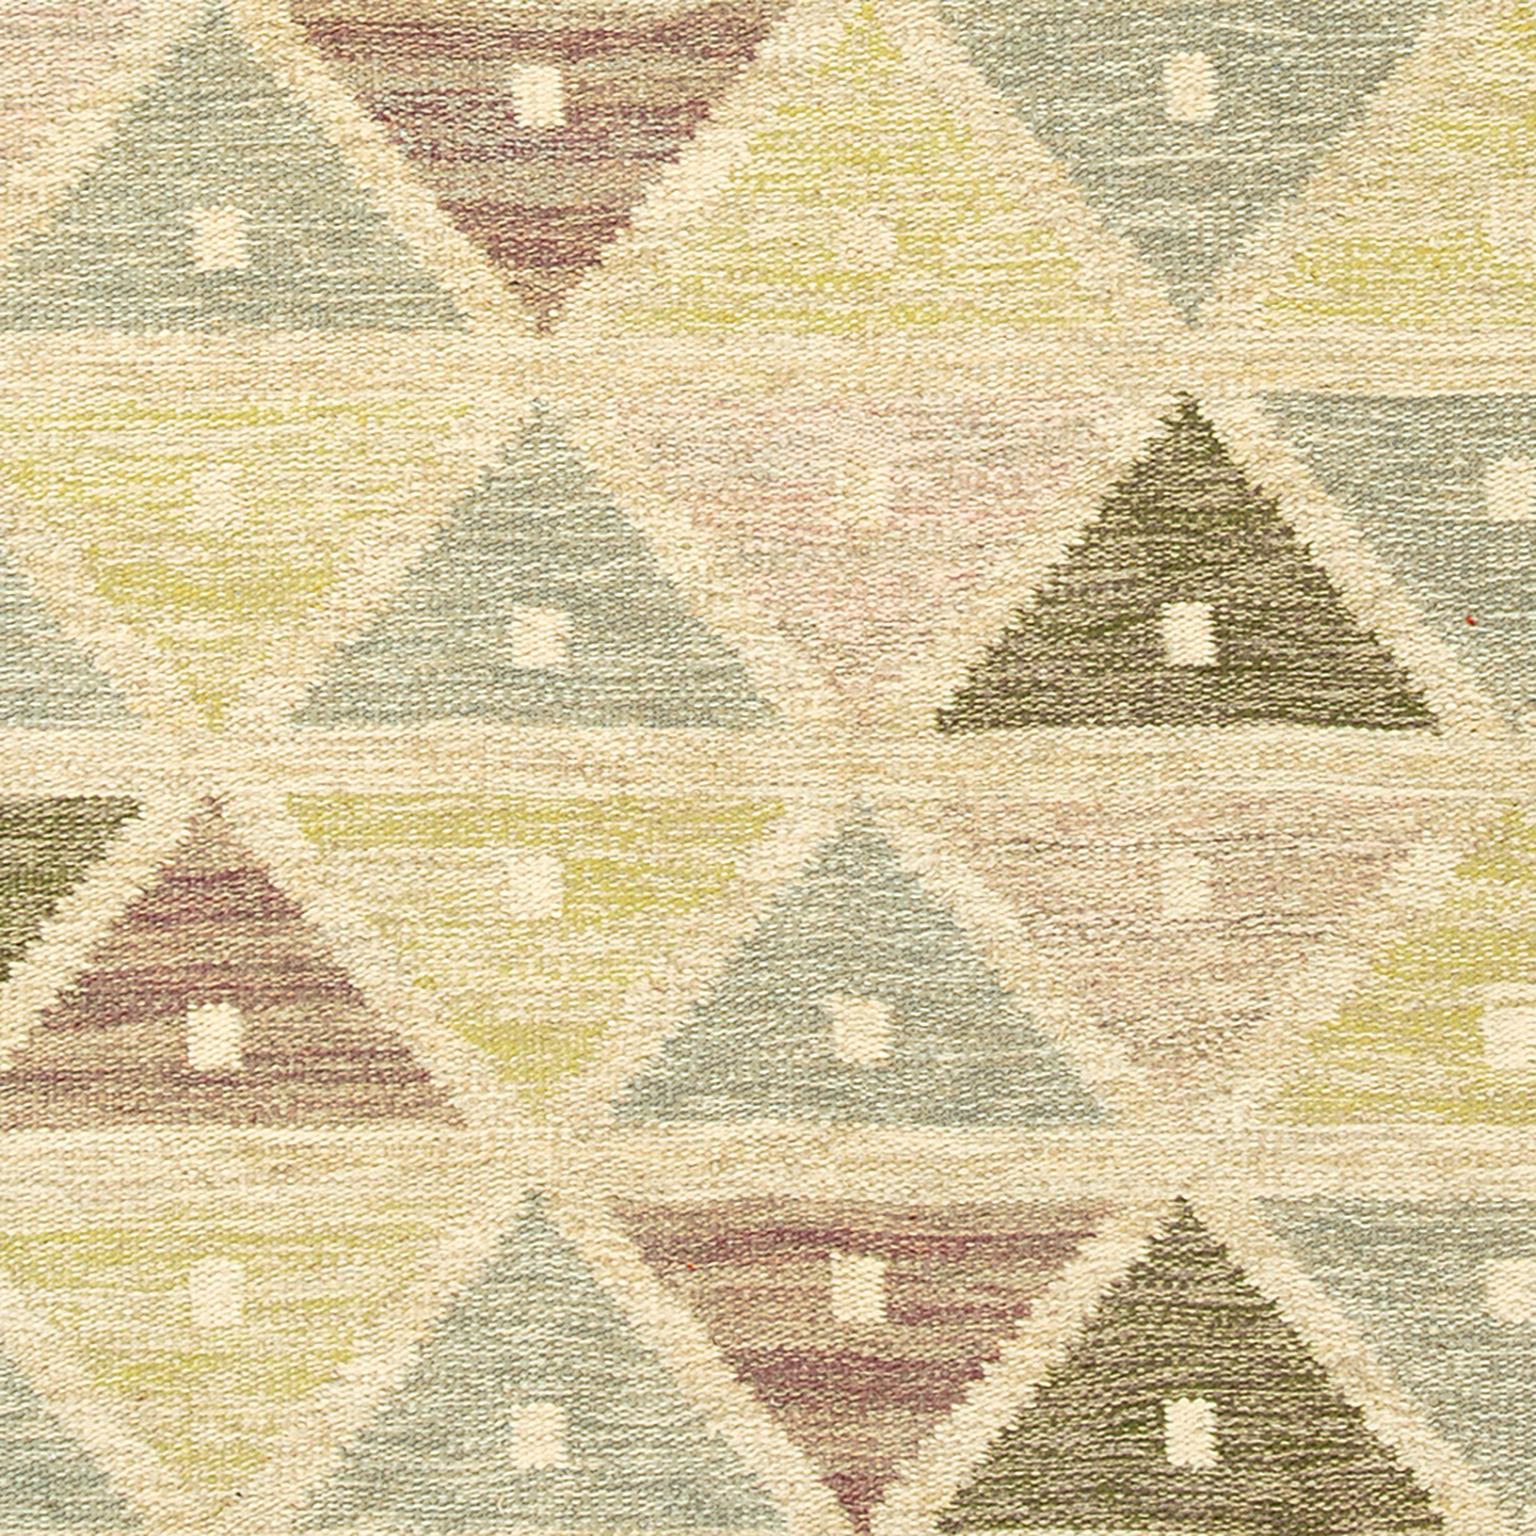 Hand-Woven Swedish Flat-Weave Rug by Sigvard Bernadotte For Sale